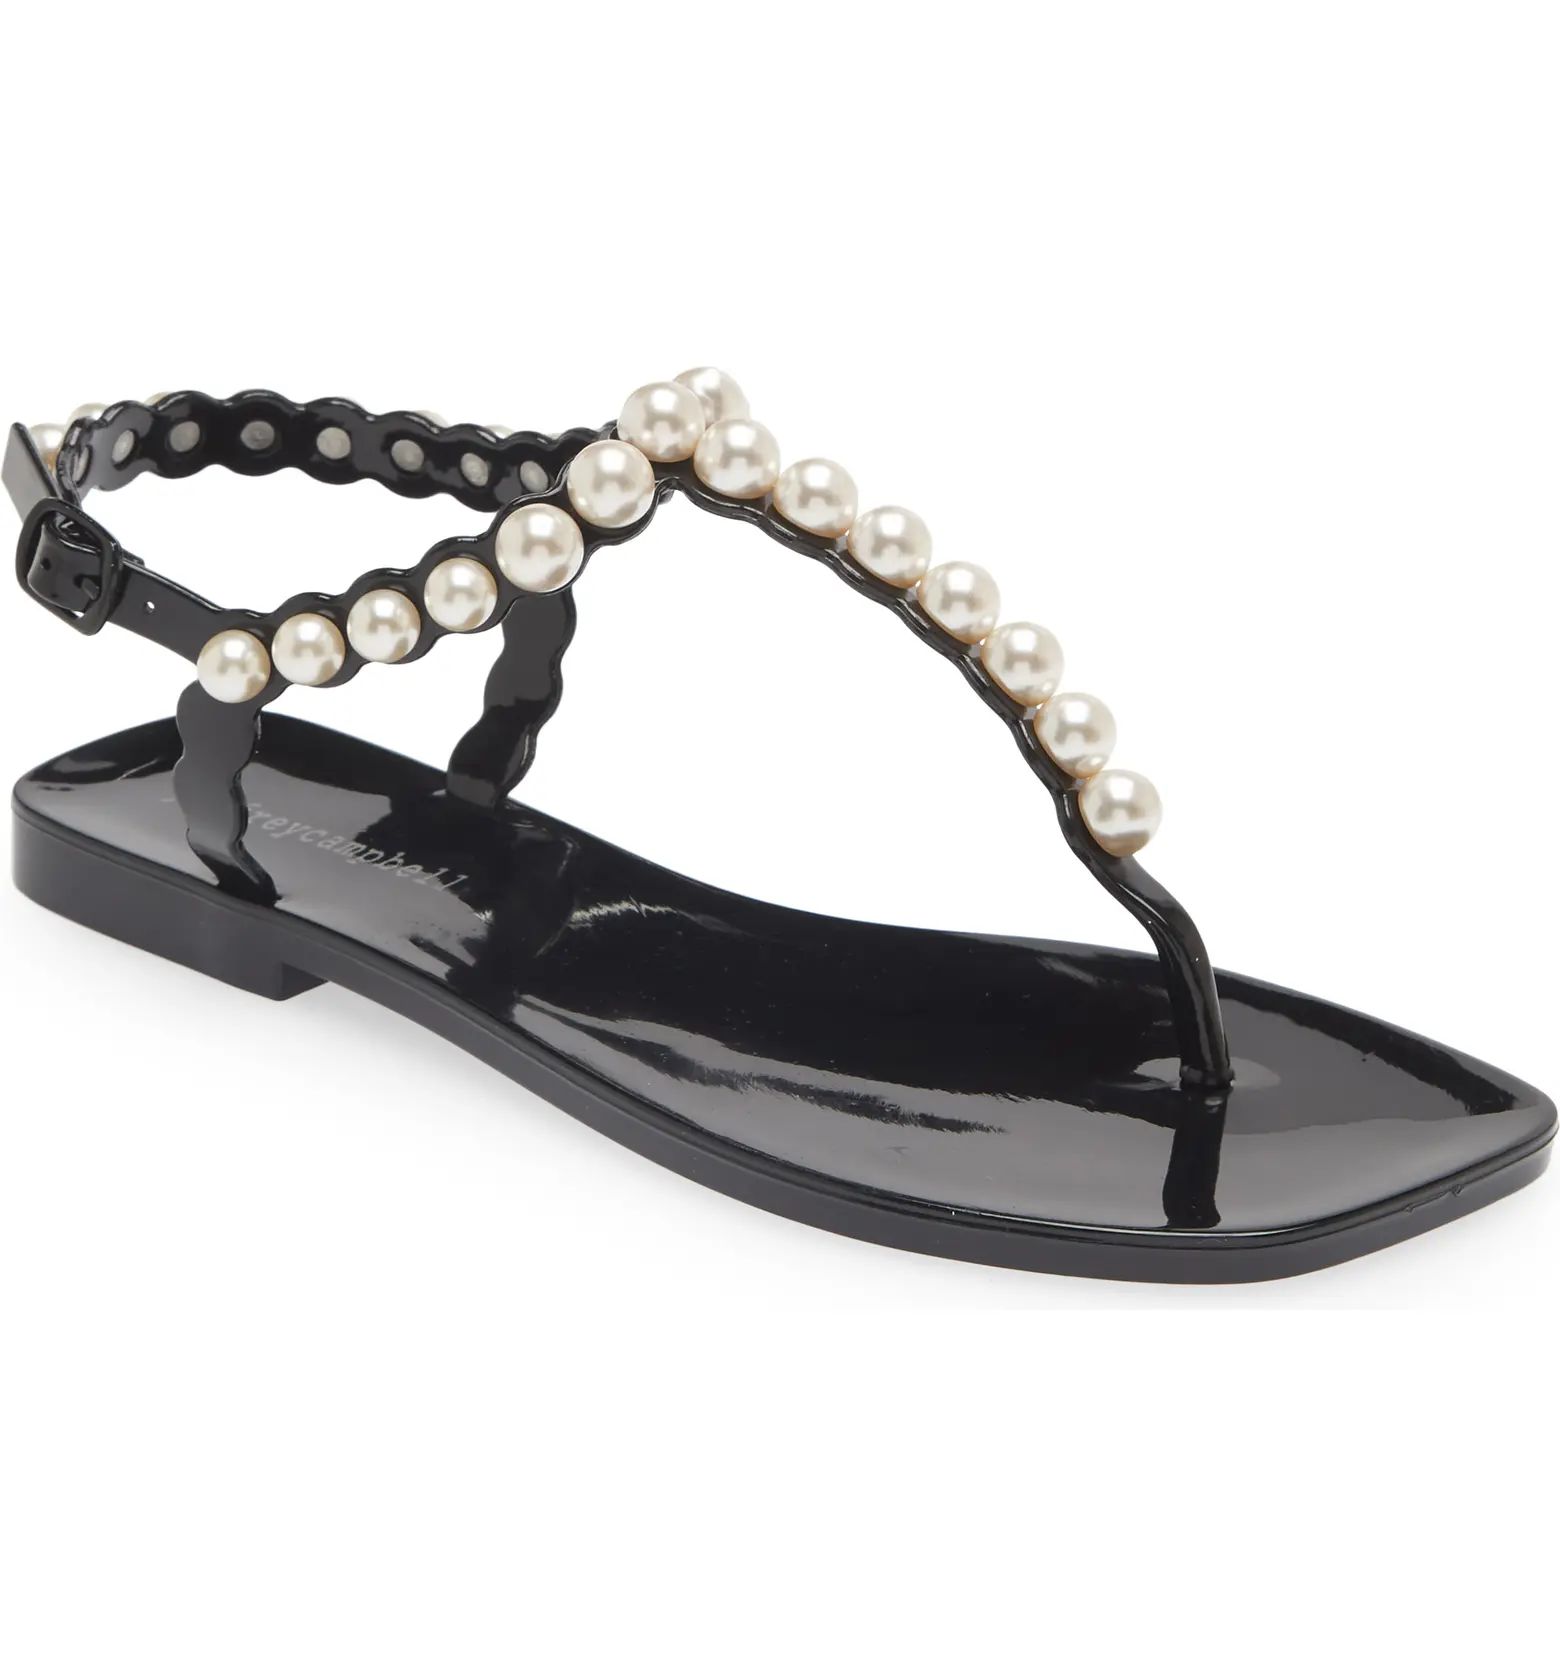 Pearlesque Imitation Pearl Ankle Strap Sandal (Women) | Nordstrom